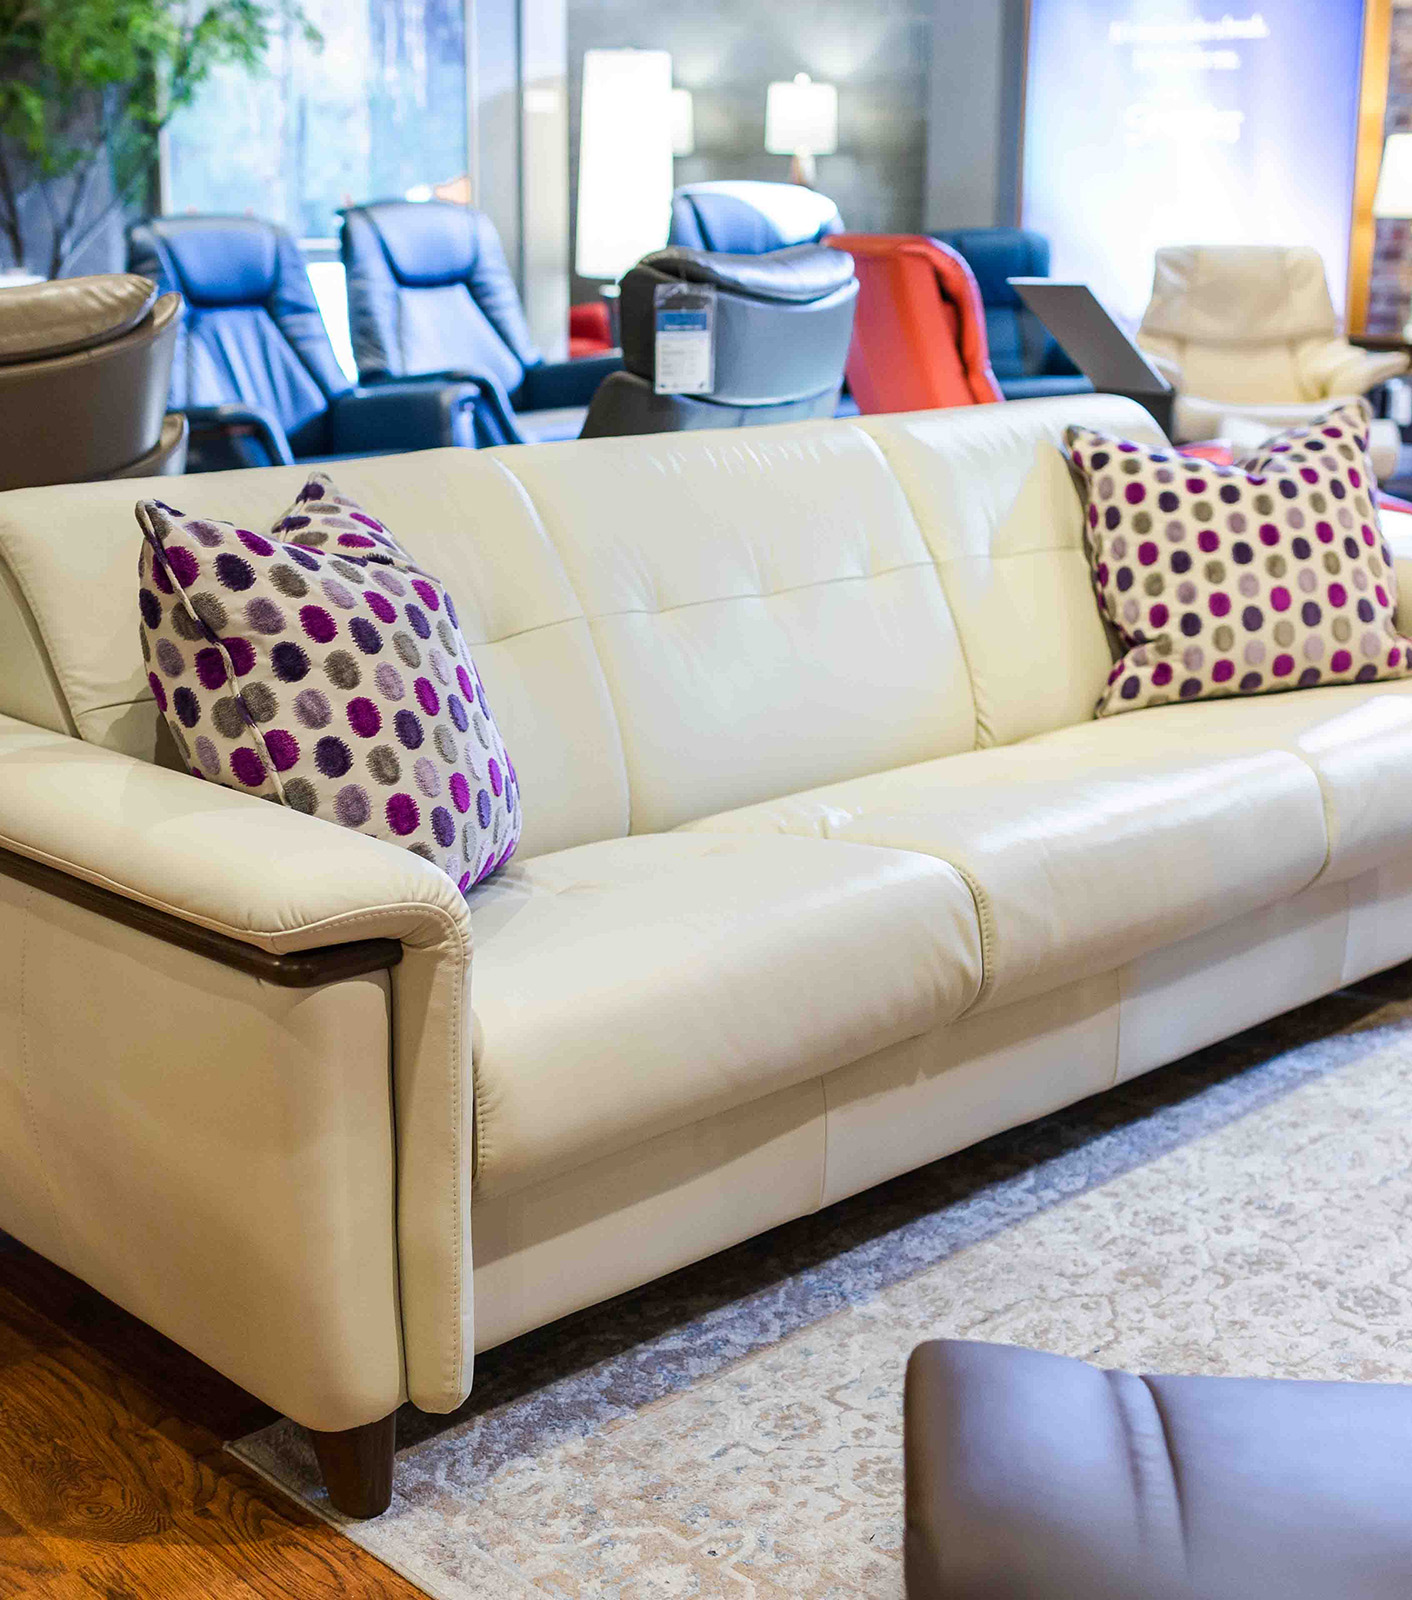 A light colored couch with a pillow with purple and grey polka dots in our Roanoke Furniture Store. Two leather like material chairs in the background.